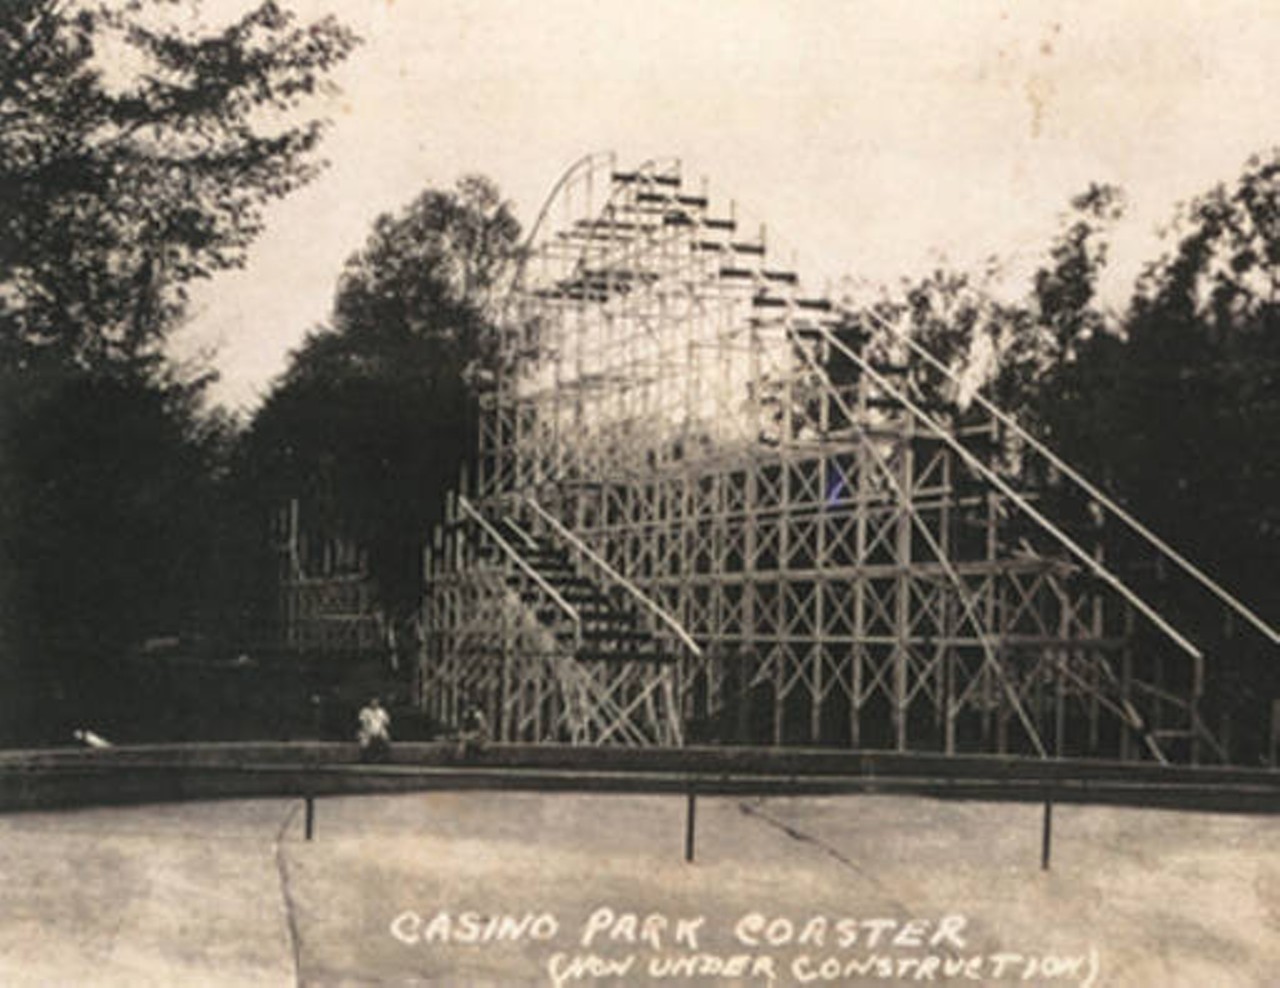 A view of the Casino Park roller coaster being constructed. The coaster was later torn down and replaced with the Coliseum.